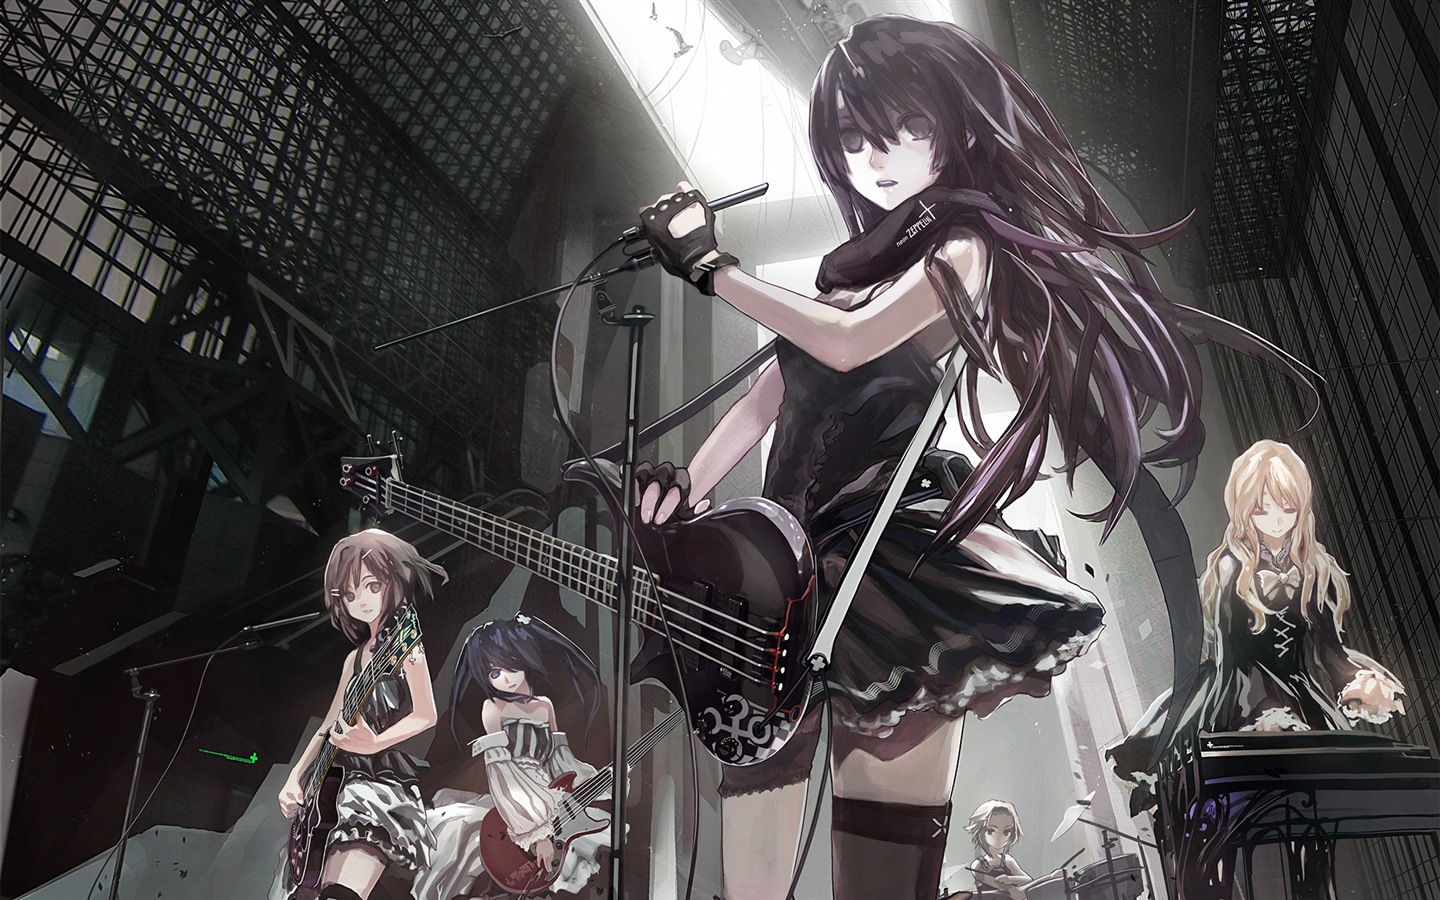 Musique guitare anime girl wallpapers HD #7 - 1440x900